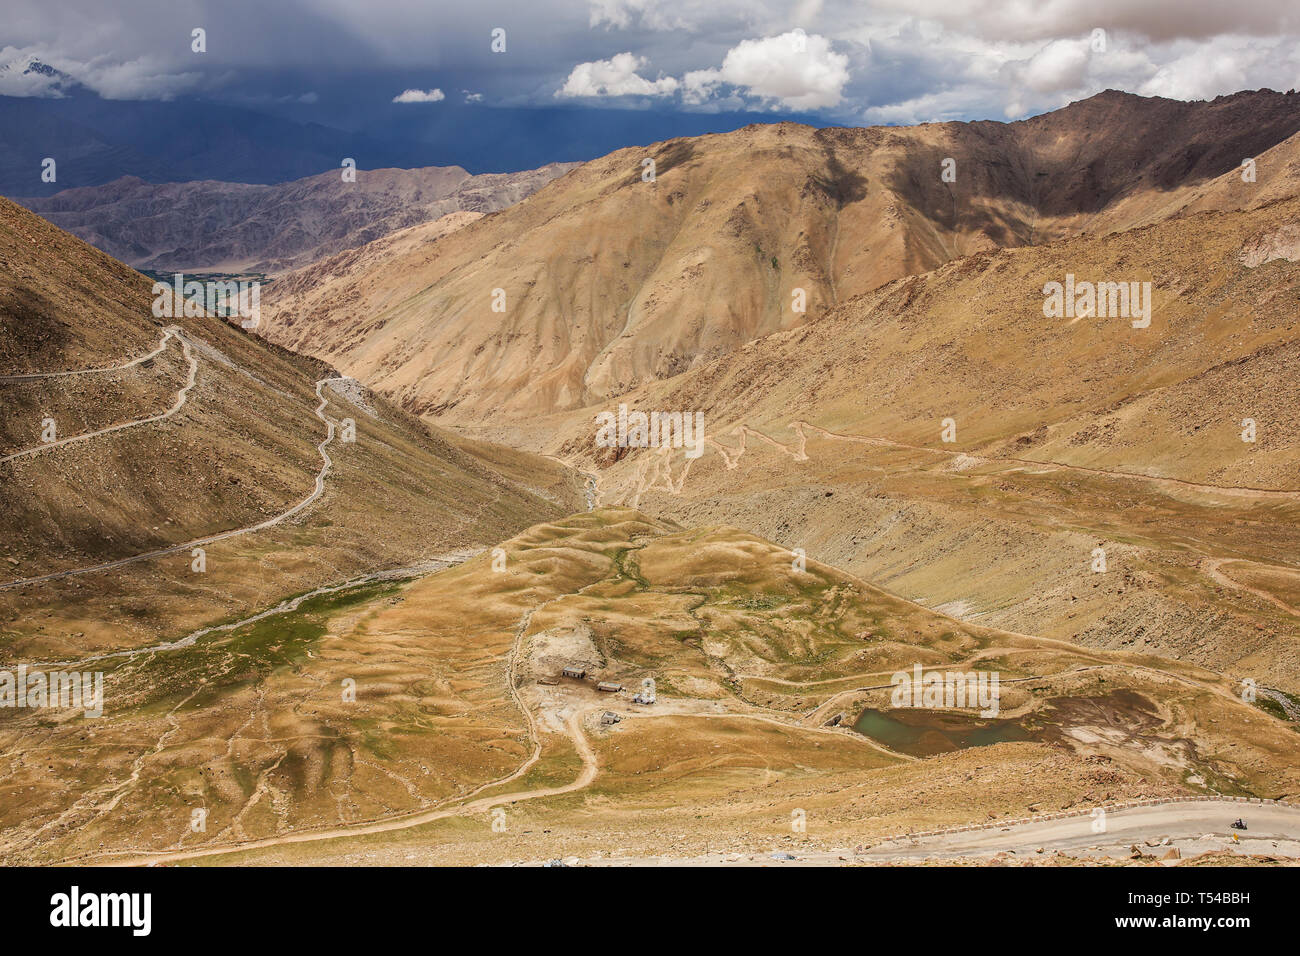 Mountain road climbing up to the pass in Himalaya mountains, Ladakh region, India Stock Photo